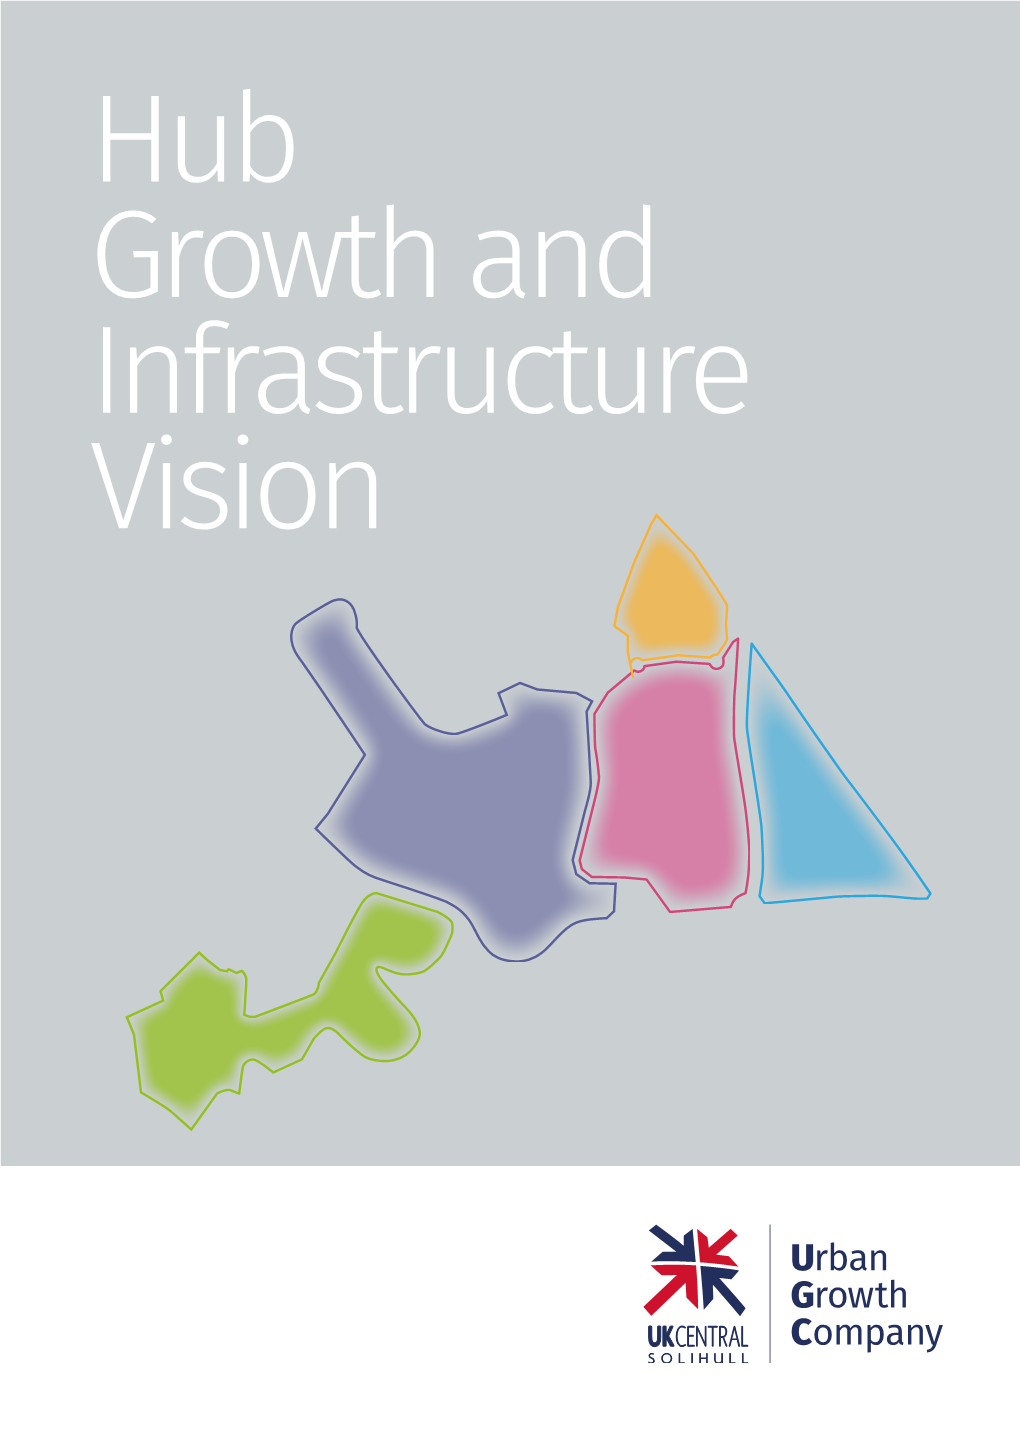 Hub Growth and Infrastructure Vision 2019